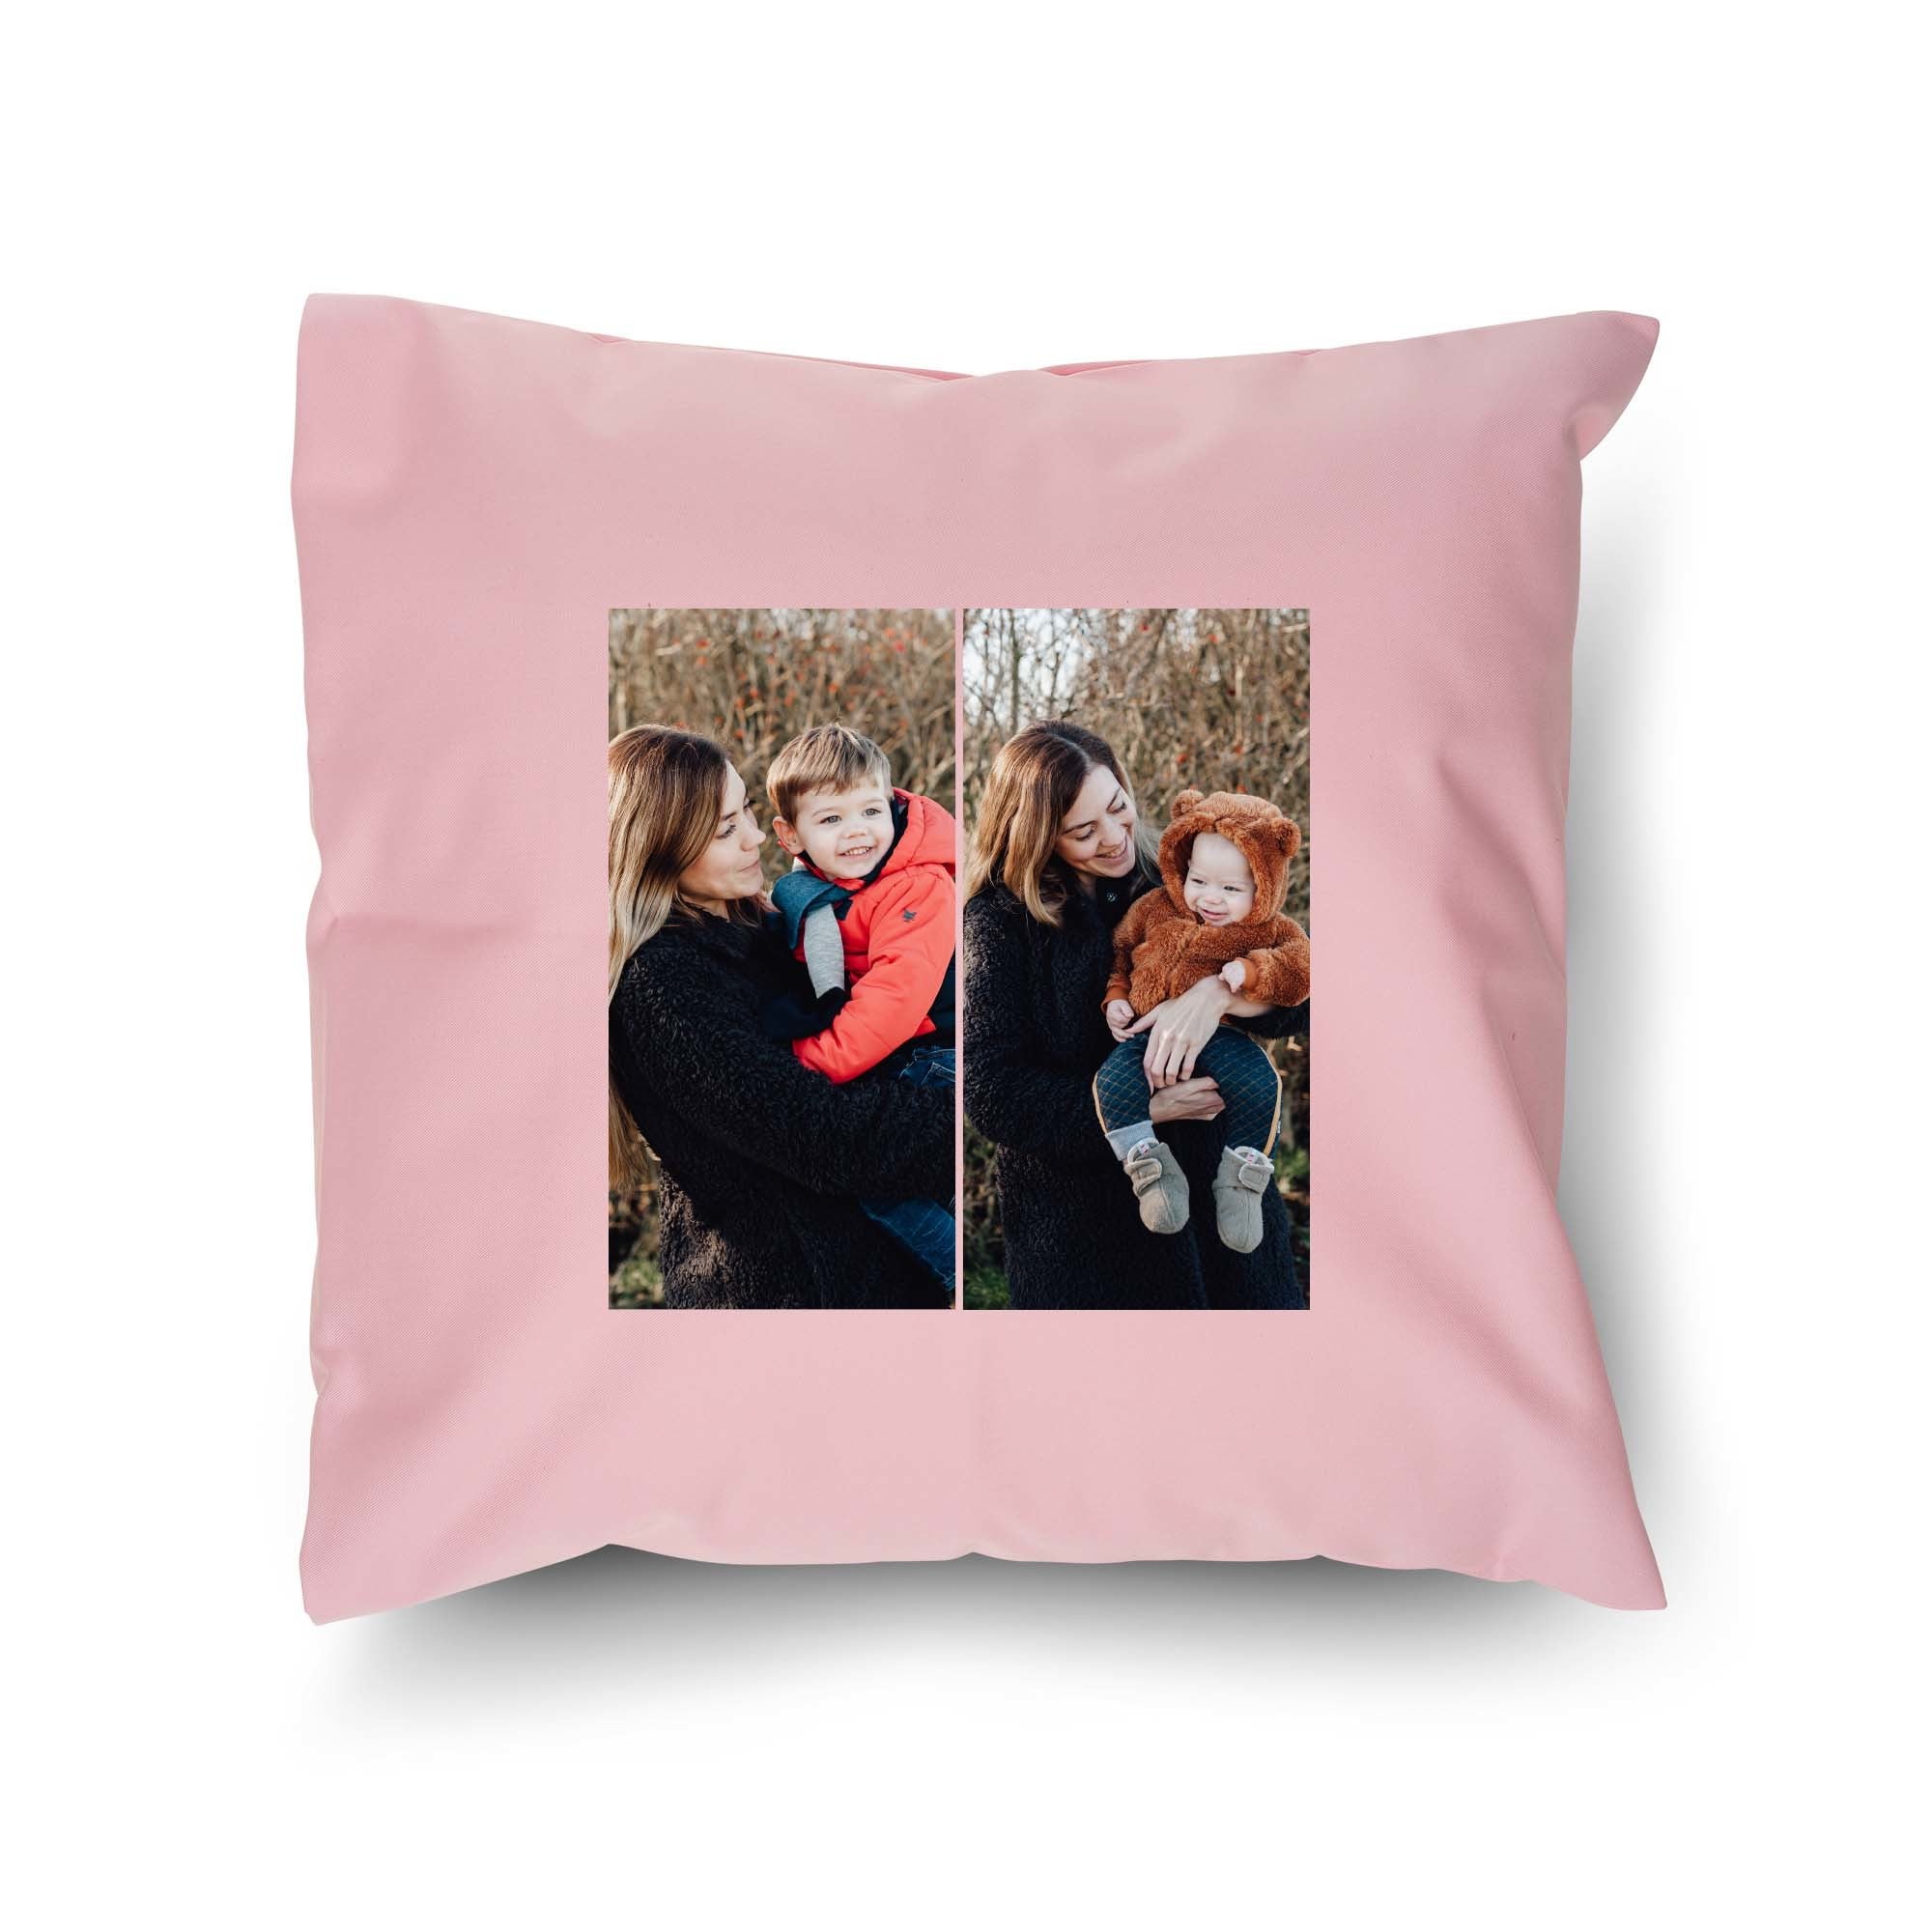 Personalised cushion - Pink - 50 x 60 cm